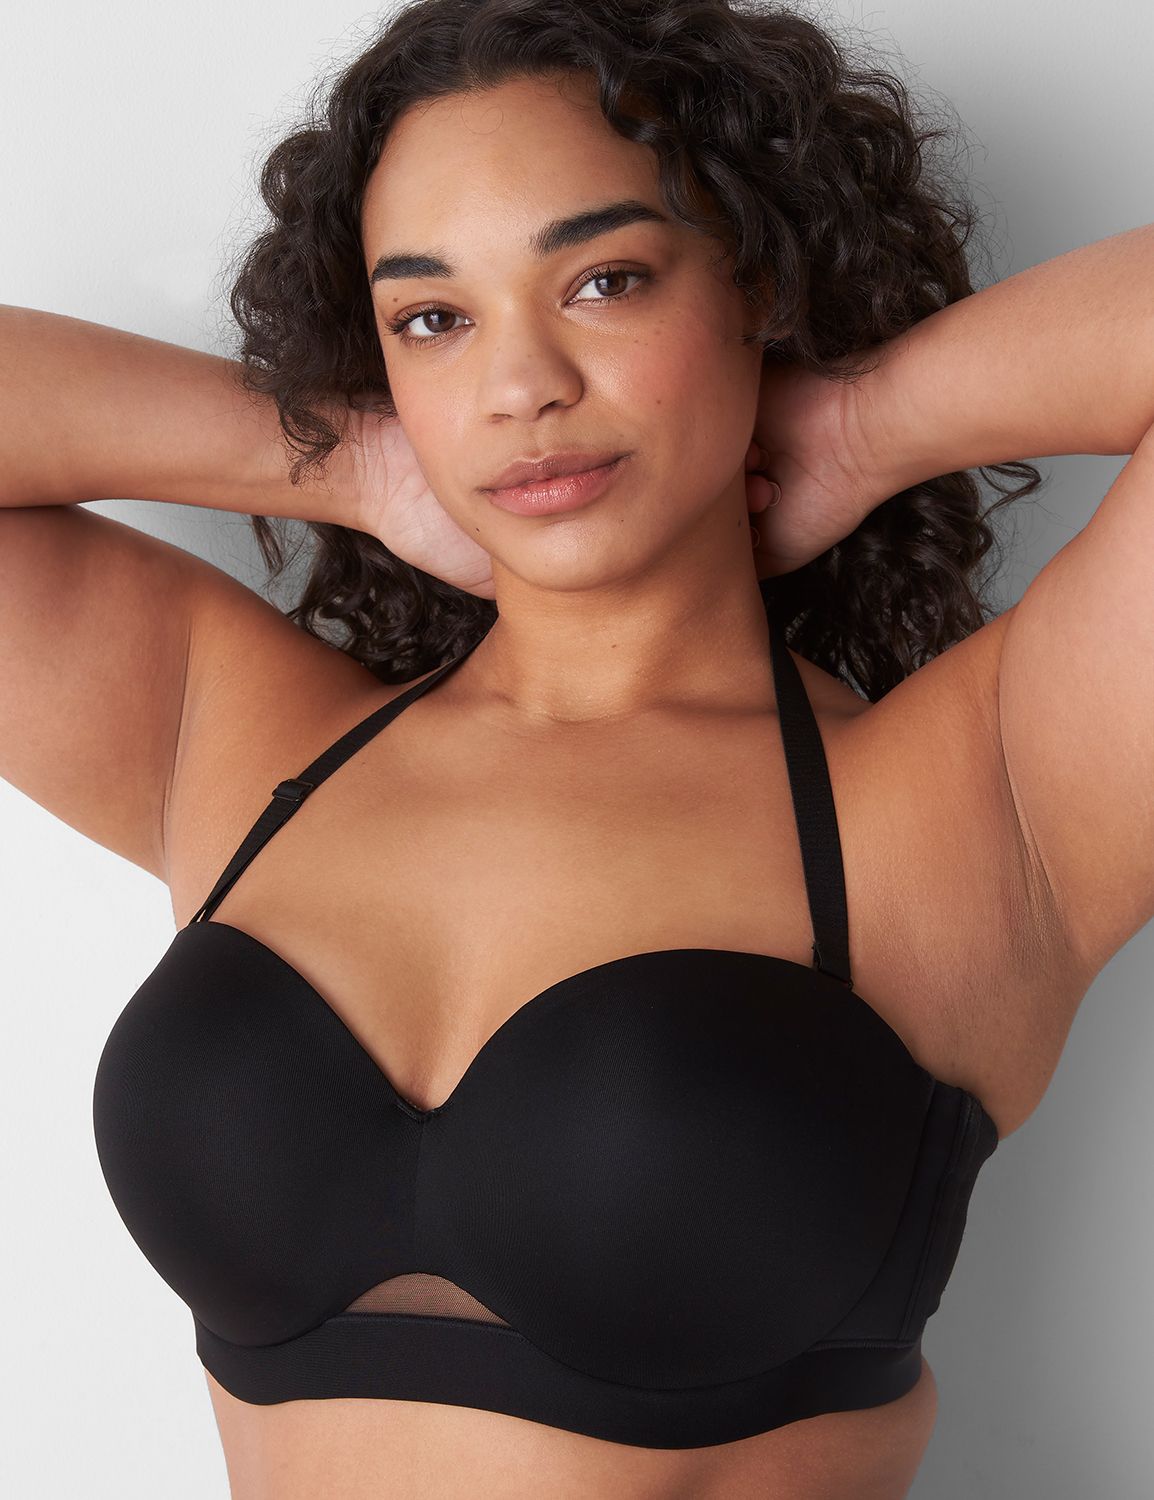 Women with large breasts, how do you wear these types of tops? Strapless  bra, tape or something else/nothing? : r/fashion